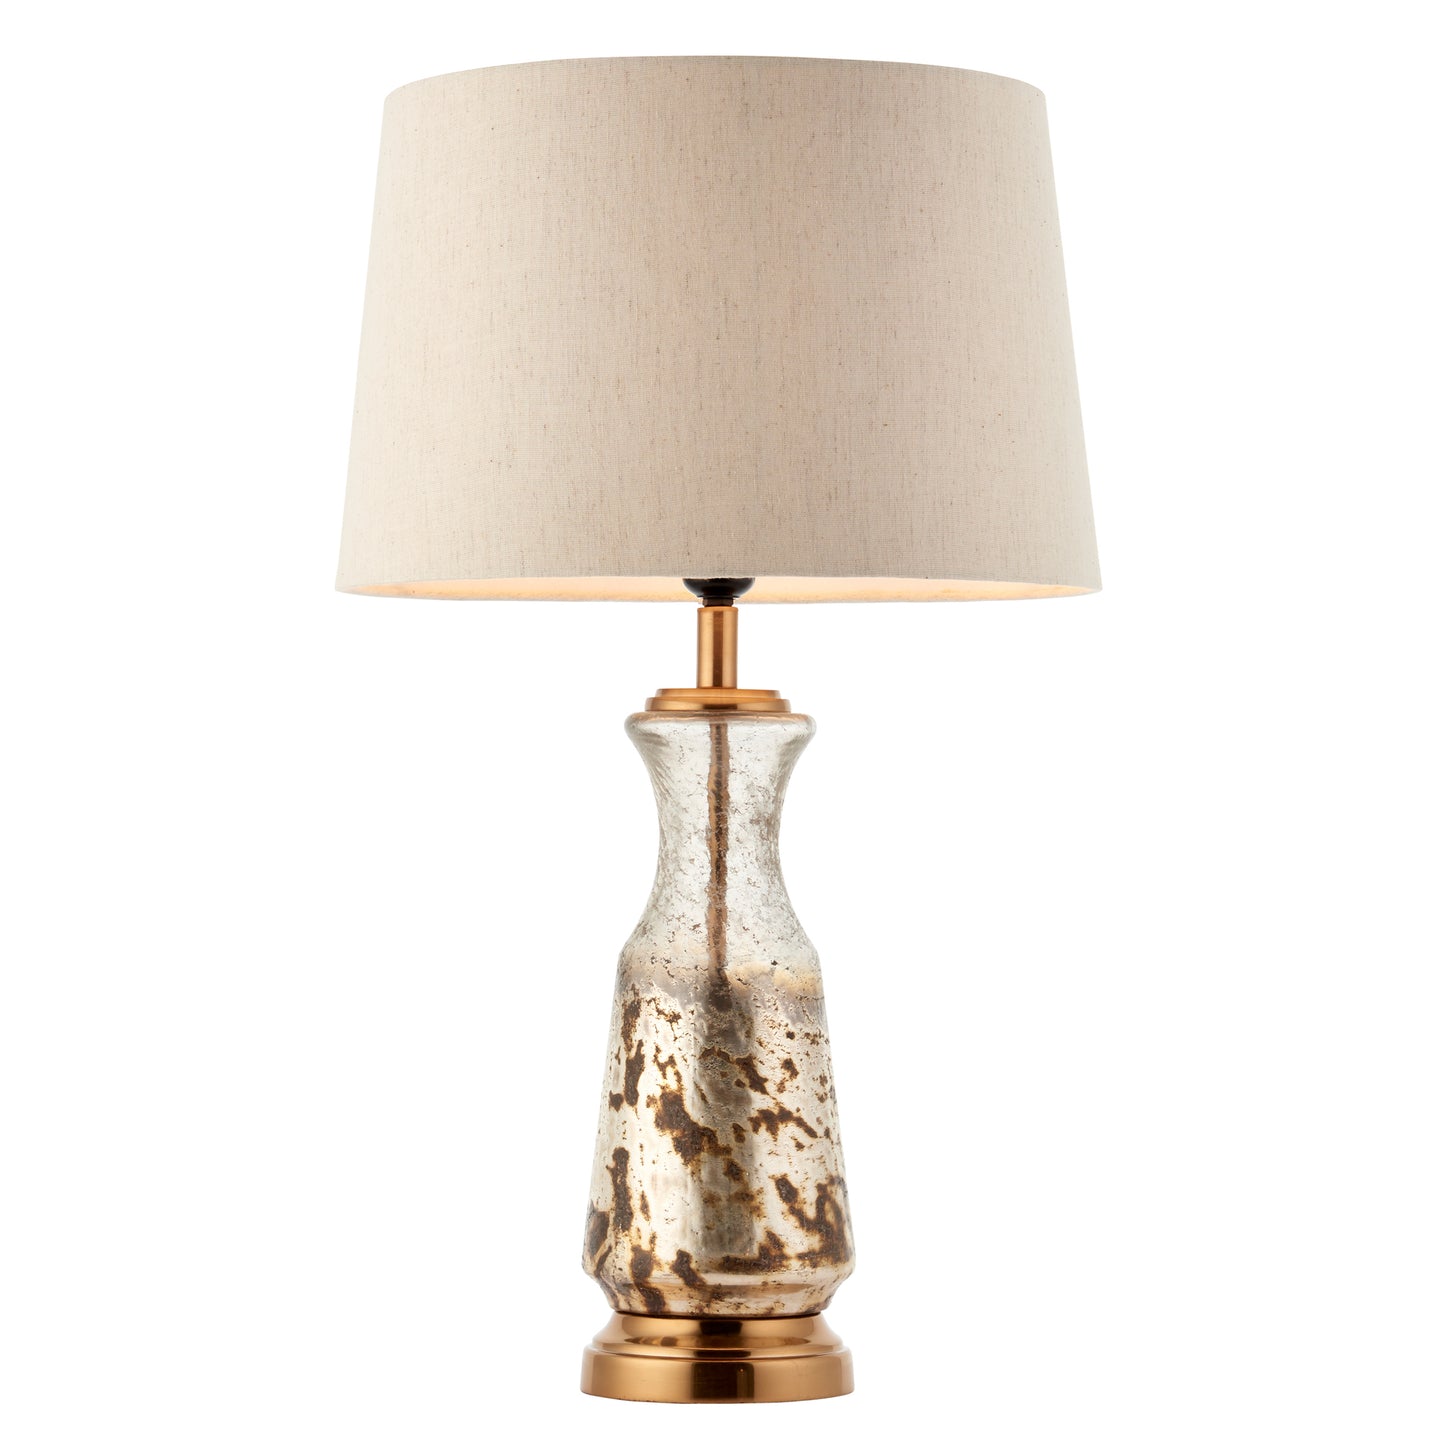 A Samuel 1 Table Light lamp with a beige shade for interior decor from Kikiathome.co.uk.